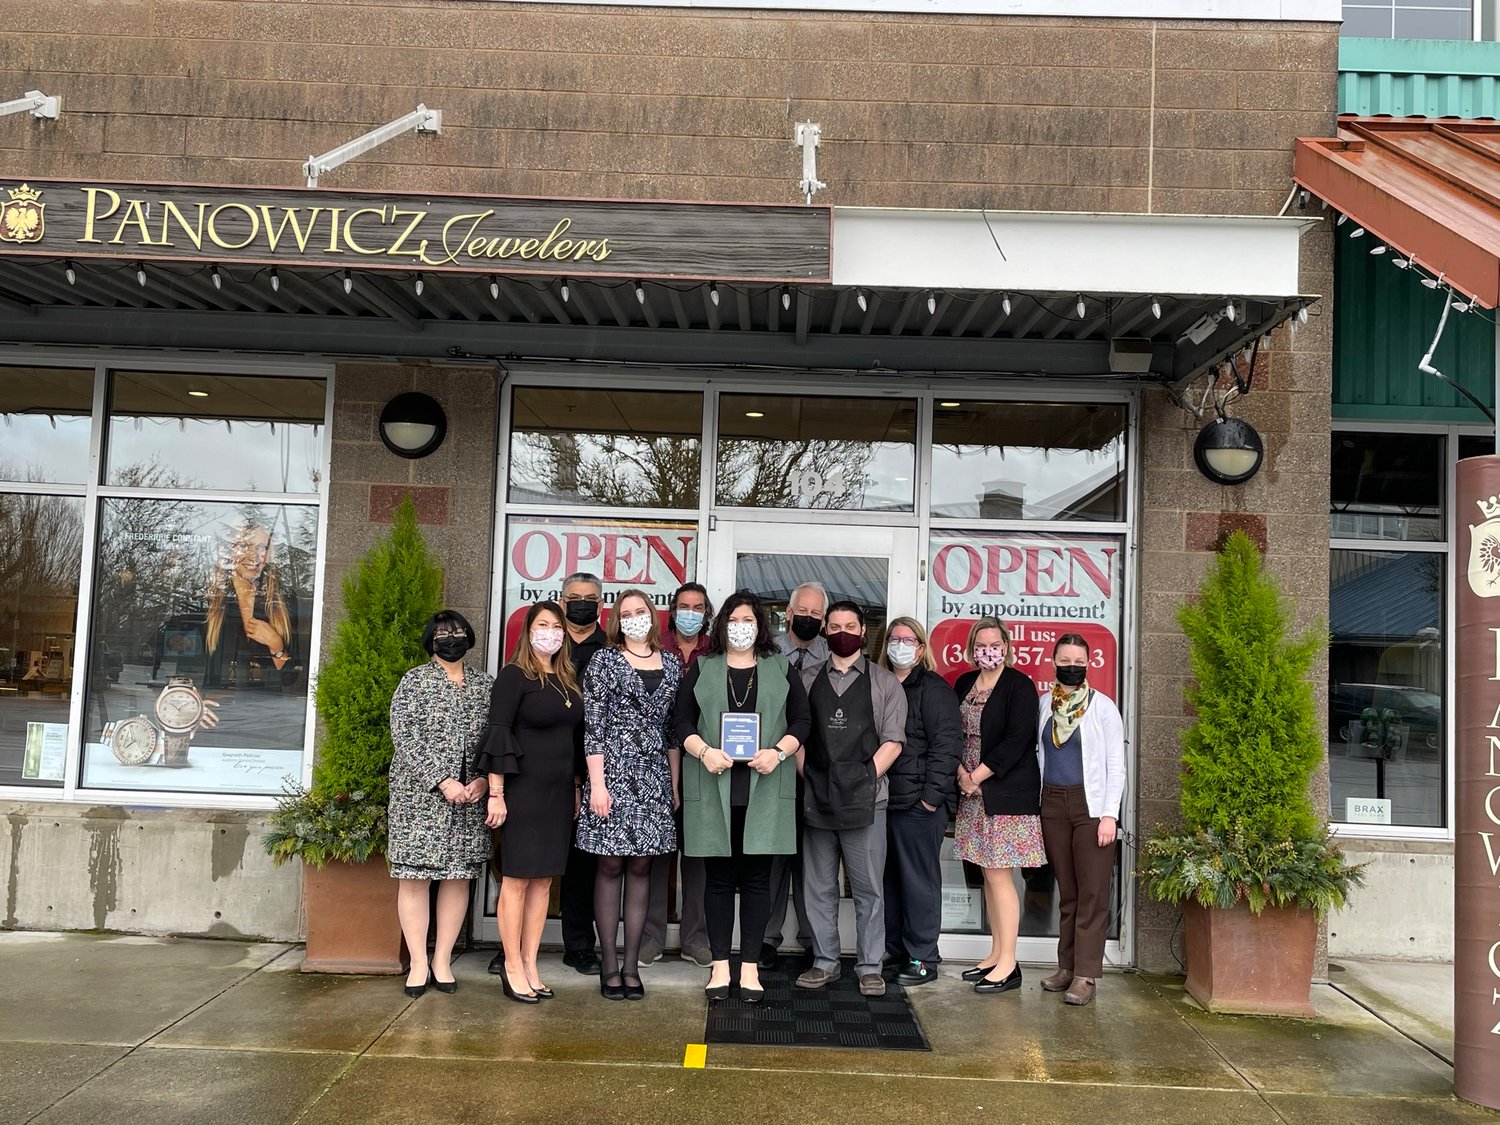 Panowicz Jewelers received a 2020 Community Leadership Award from Leadership Thurston County (LTC).